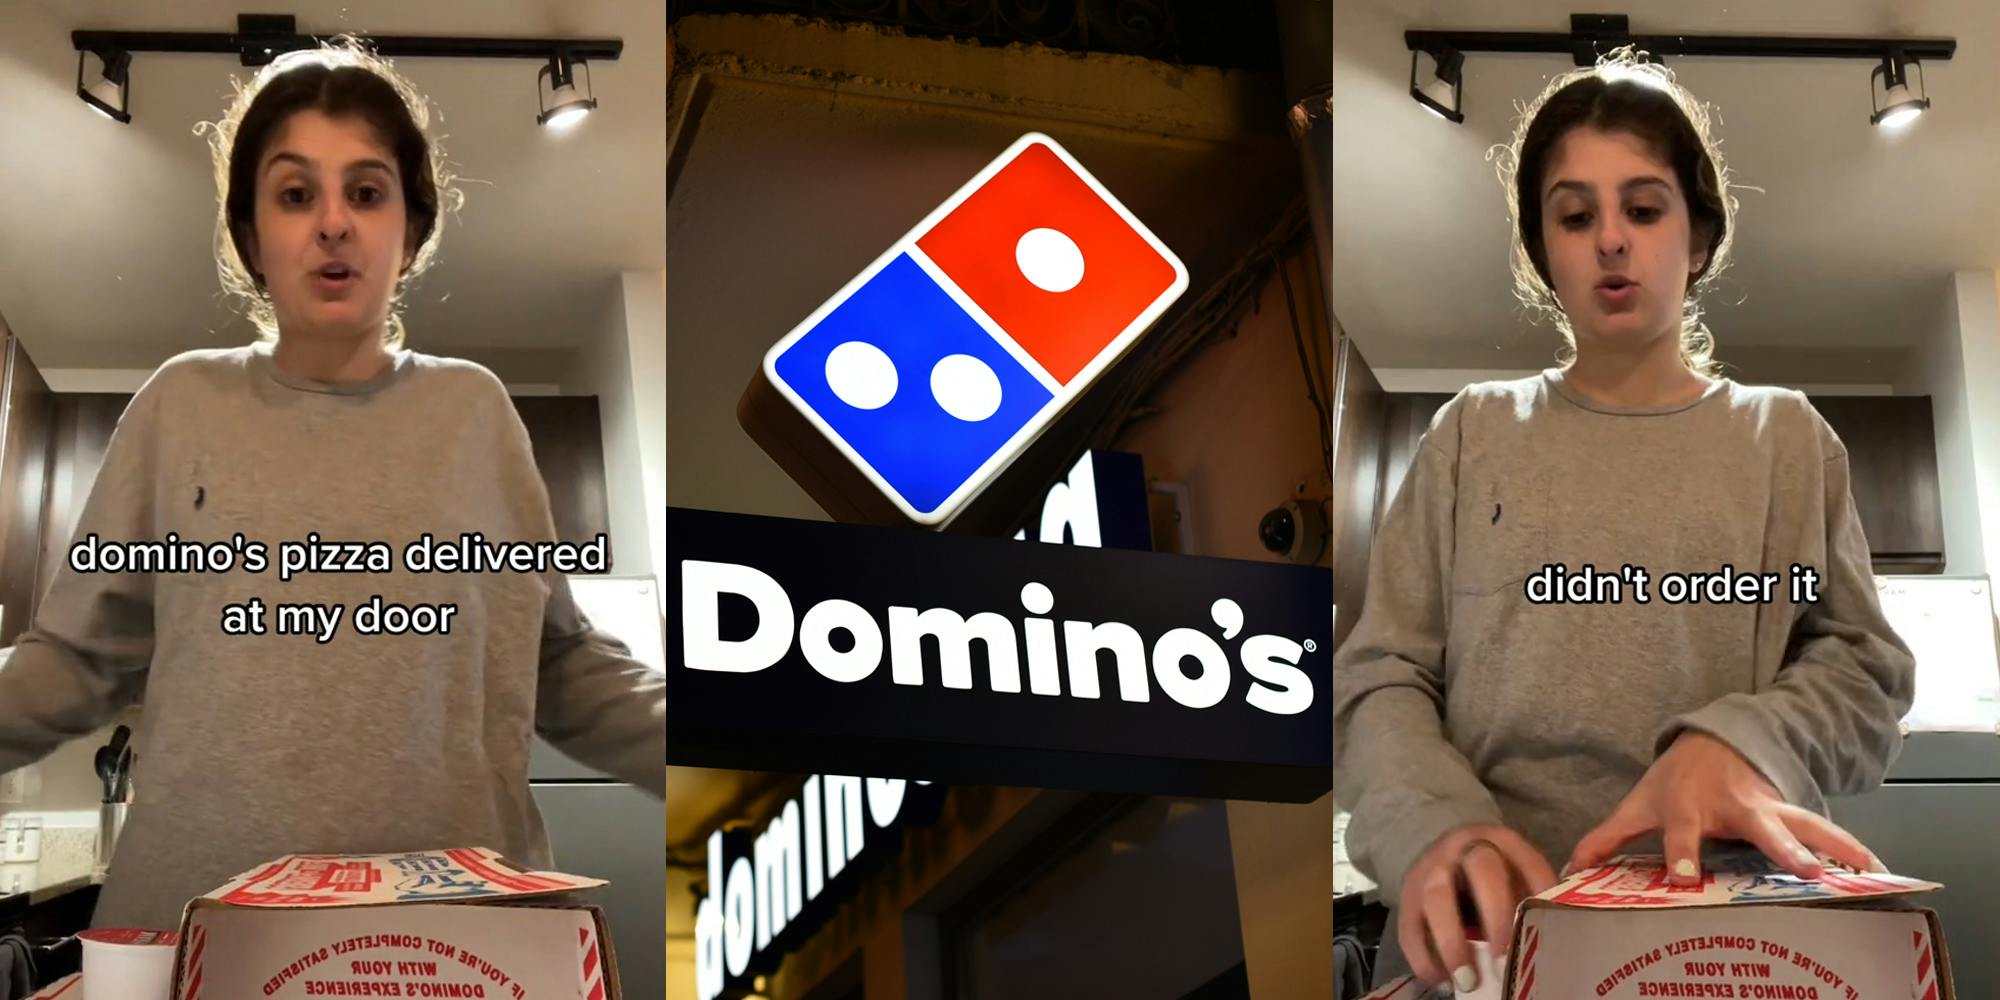 Domino's customer speaking with food with caption "domino's pizza delivered at my door" (l) Domino's Pizza sign hanging (c) Domino's customer speaking with food with caption "didn't order it" (r)